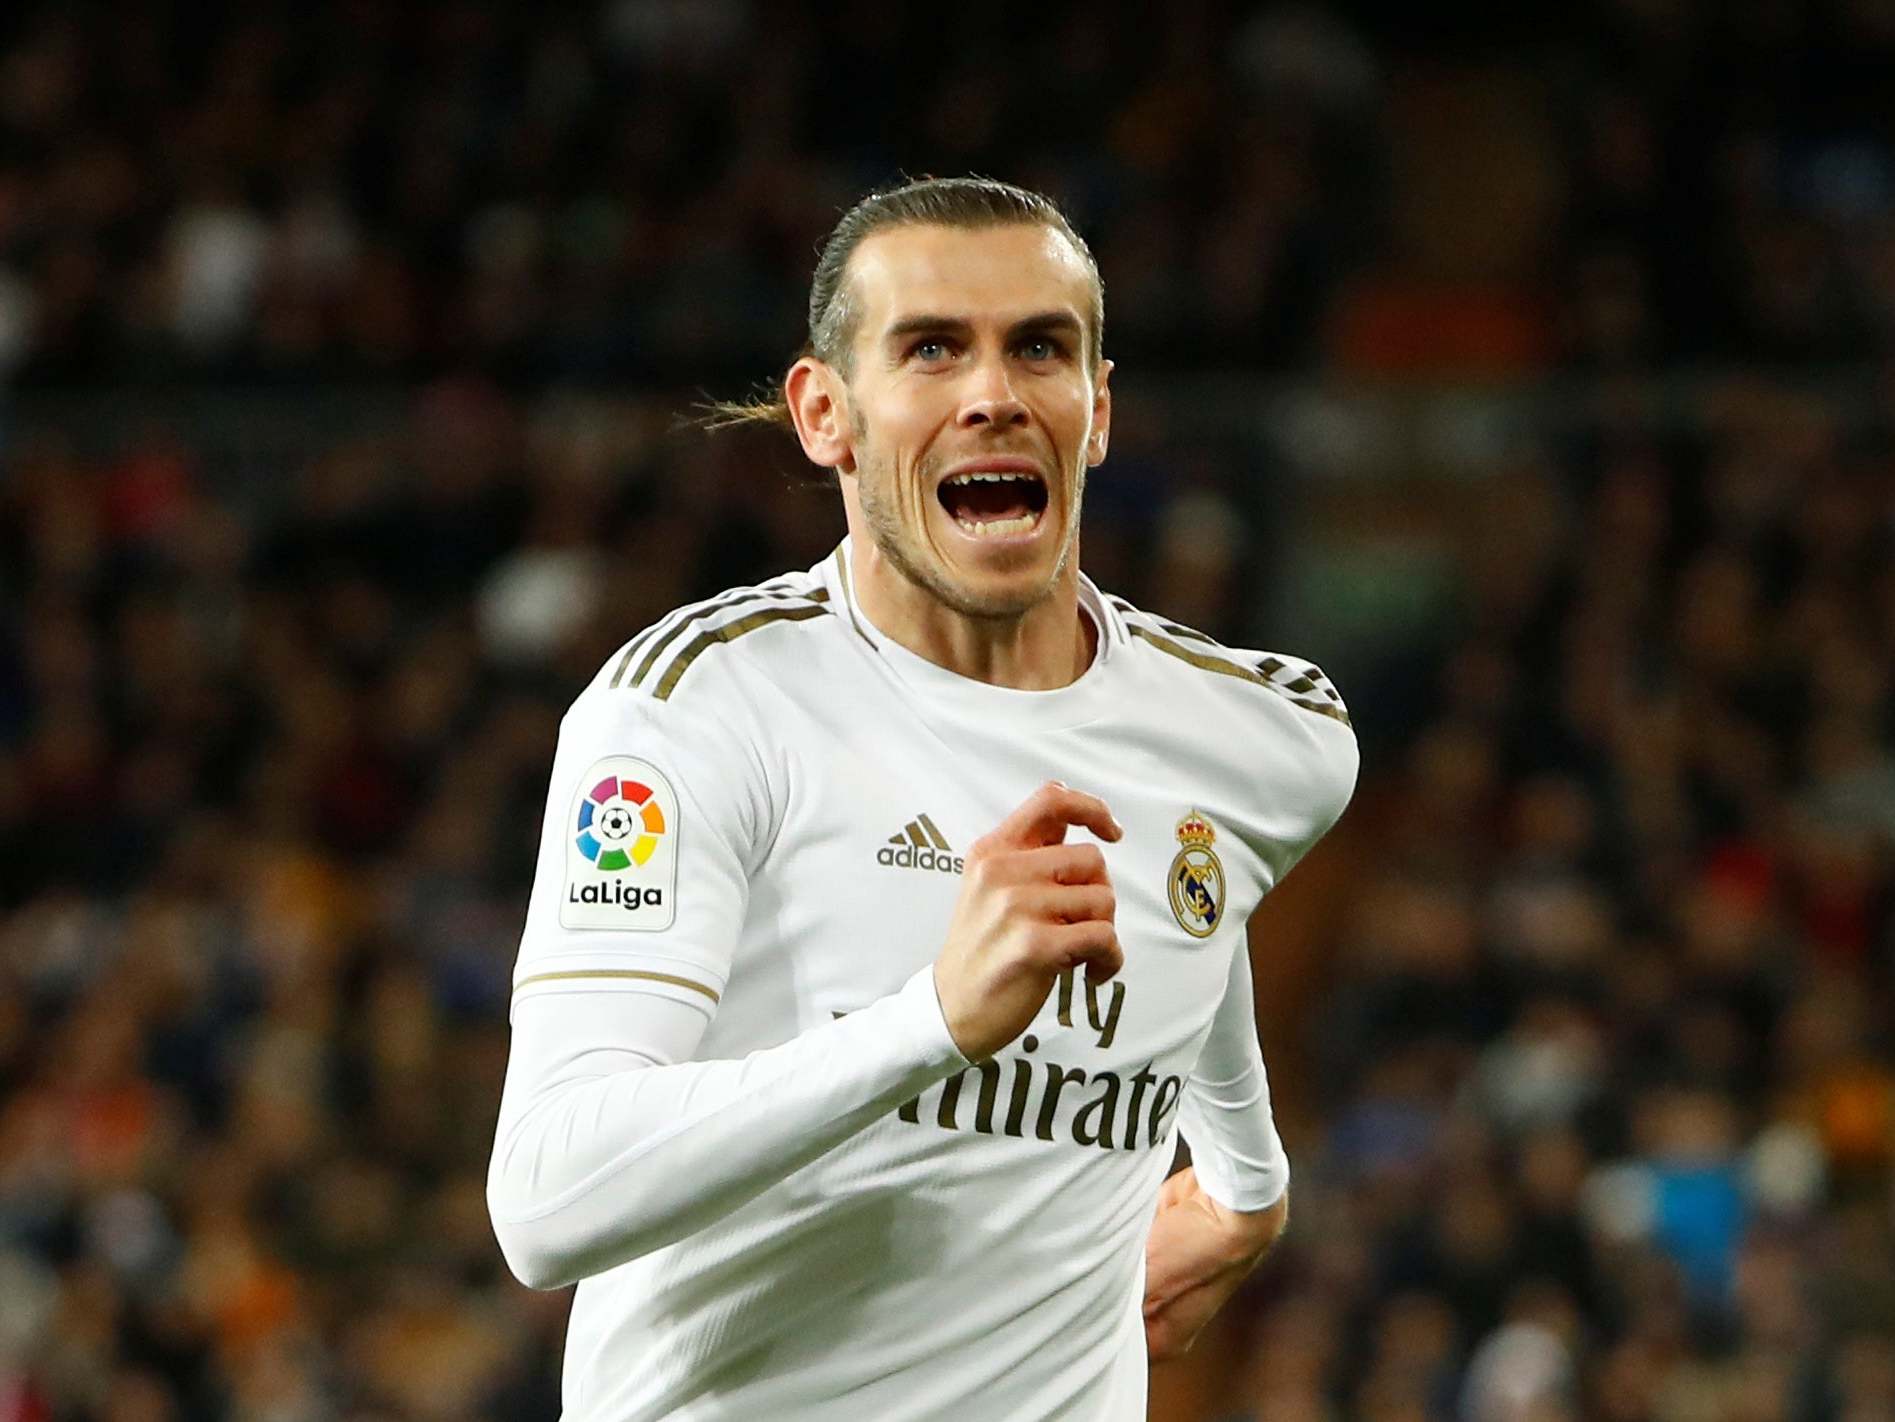 Gareth Bale will miss the Spanish Super Cup final for Real Madrid